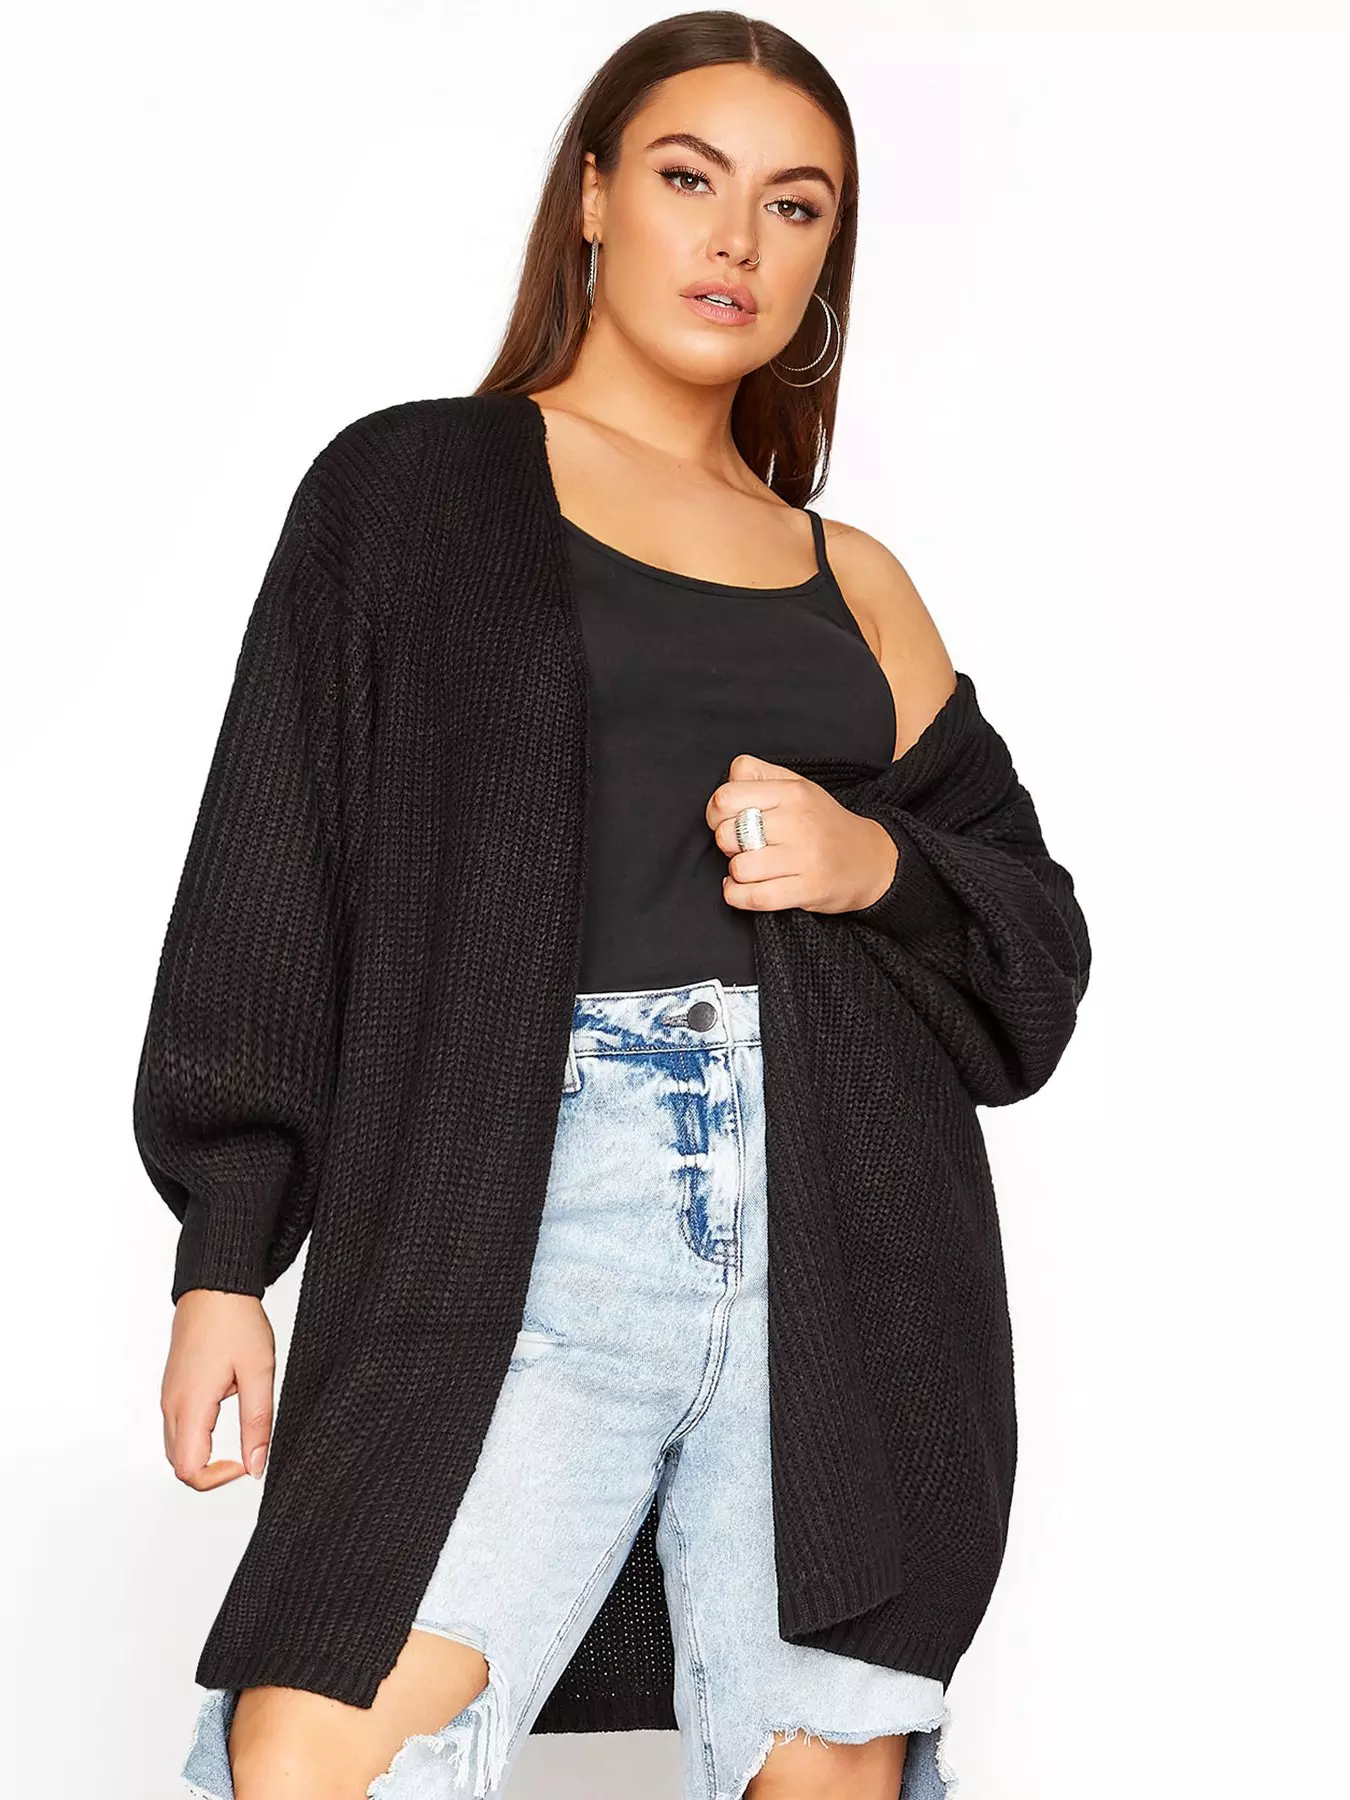 Brink at se Hejse Women's Plus Size Cardigans & Sweaters | Very.co.uk